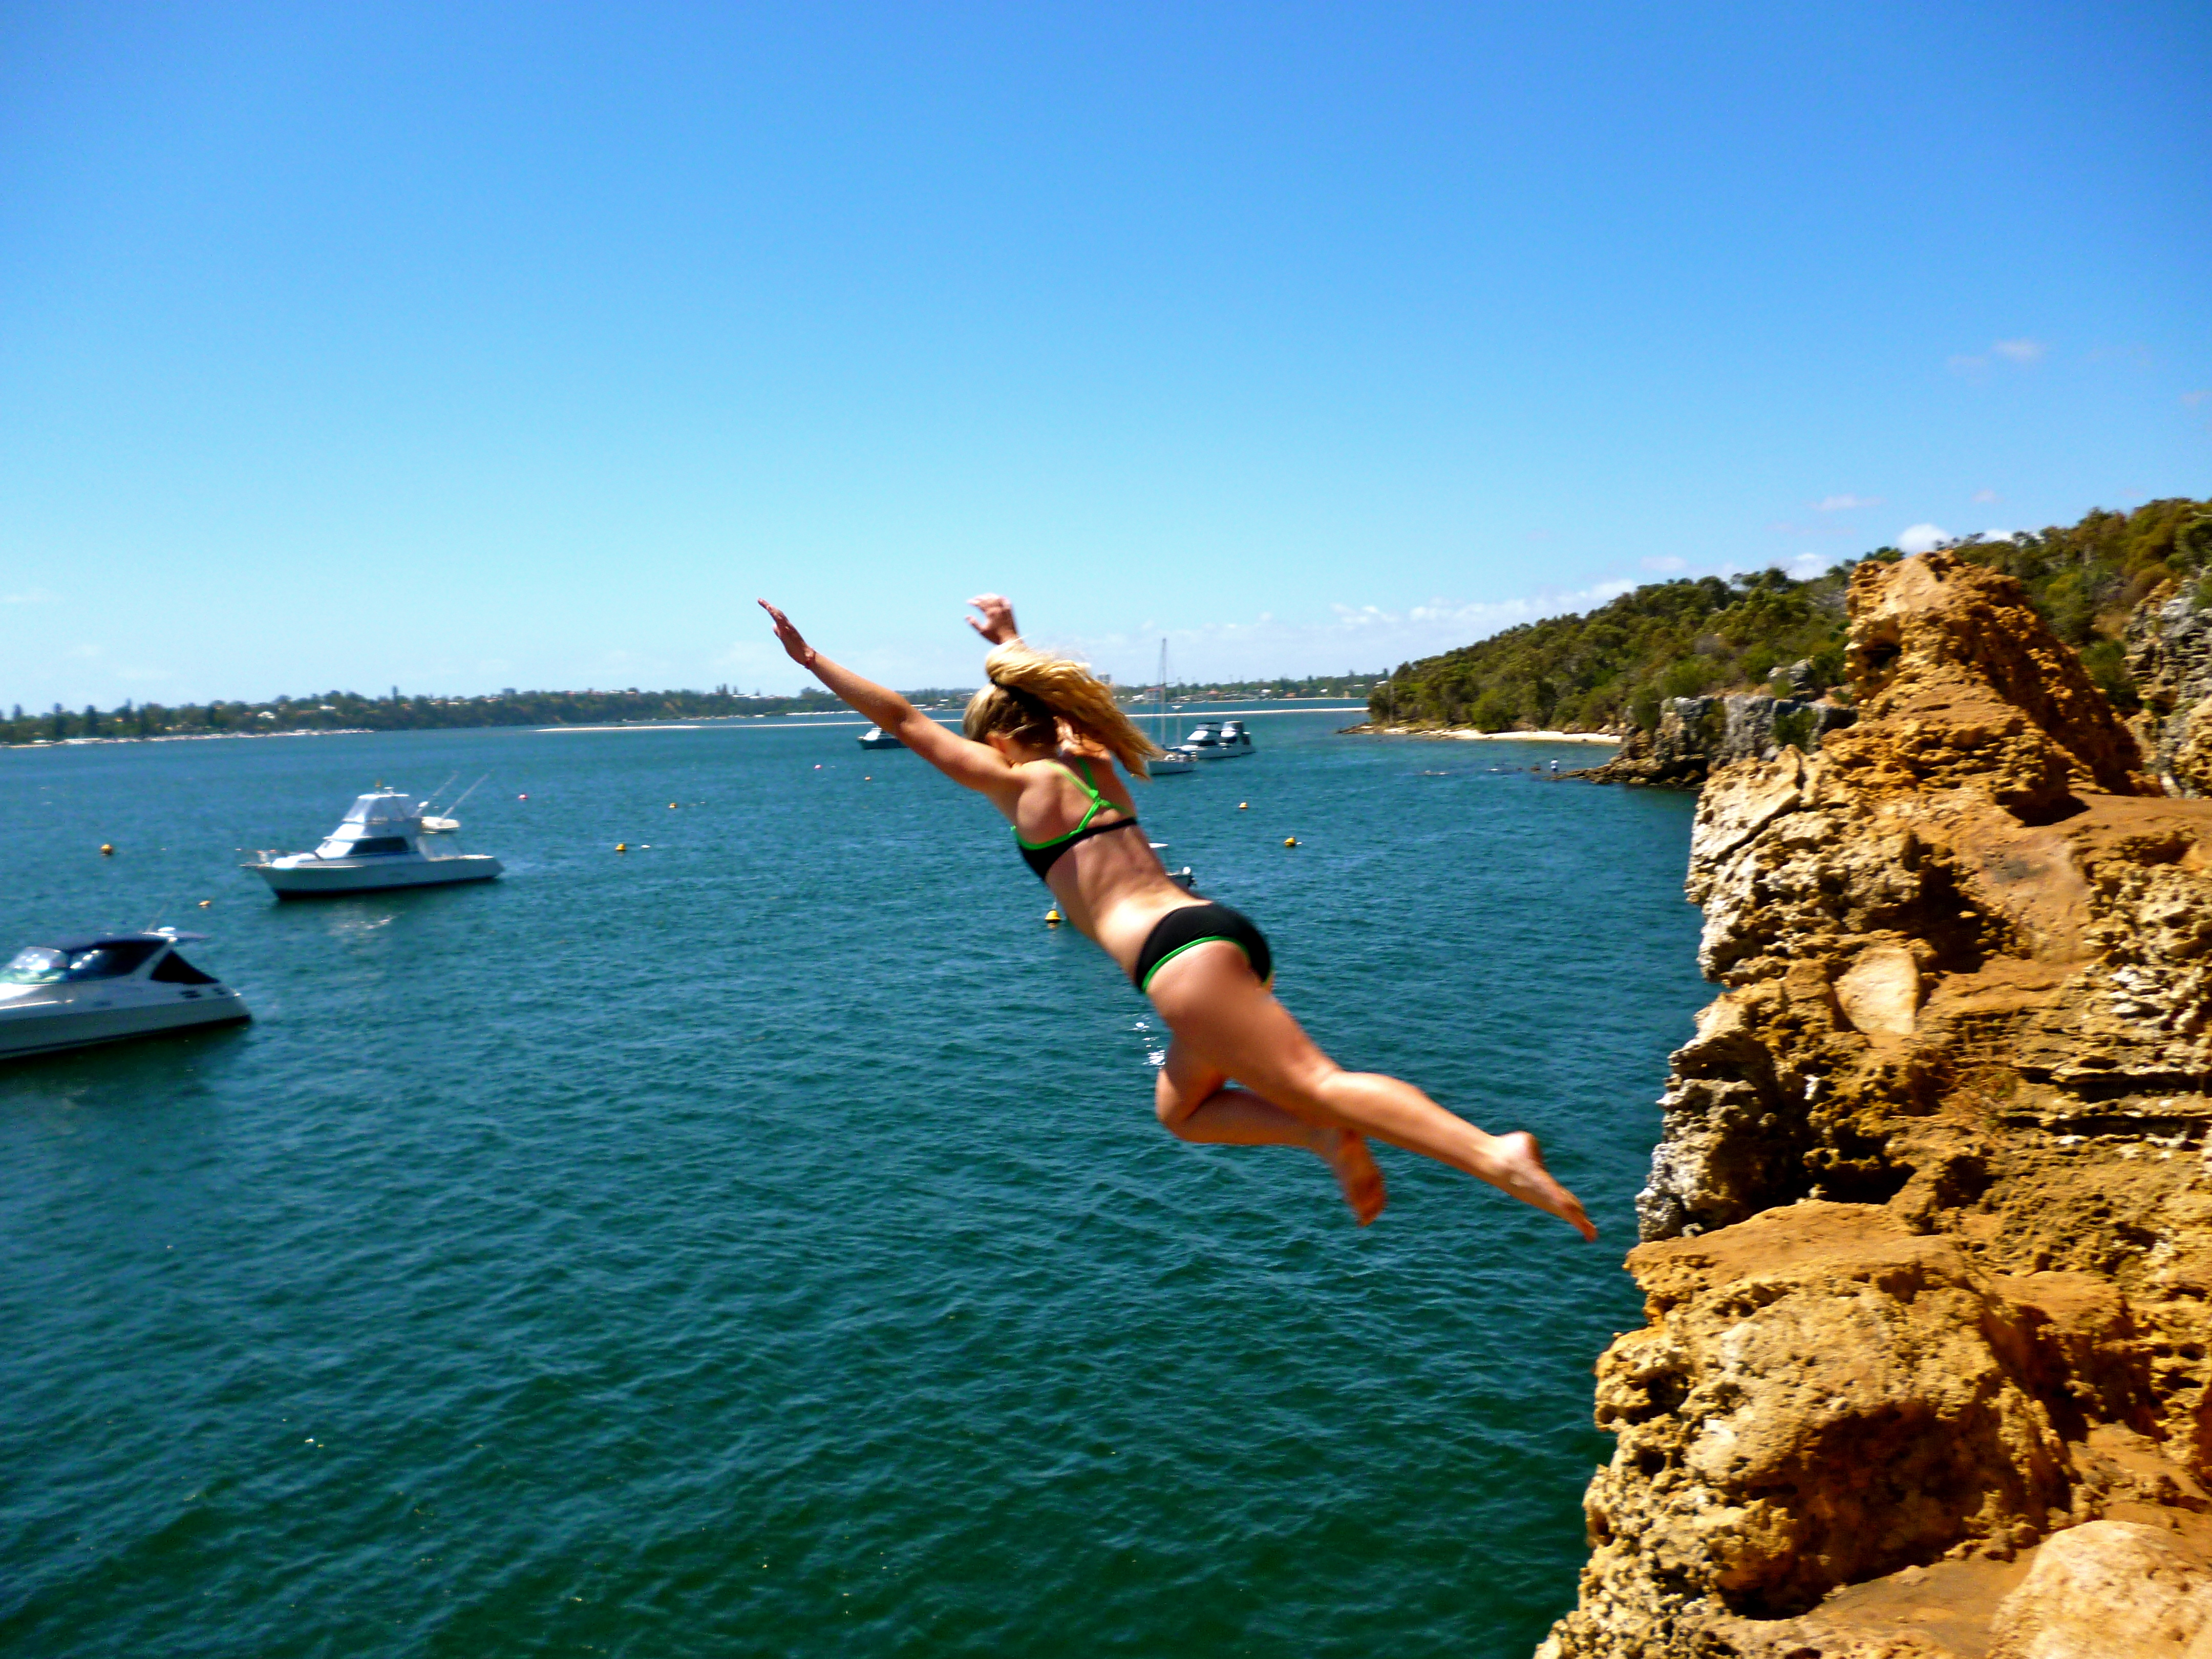 Cliff Diving Wallpapers and Background Images   stmednet